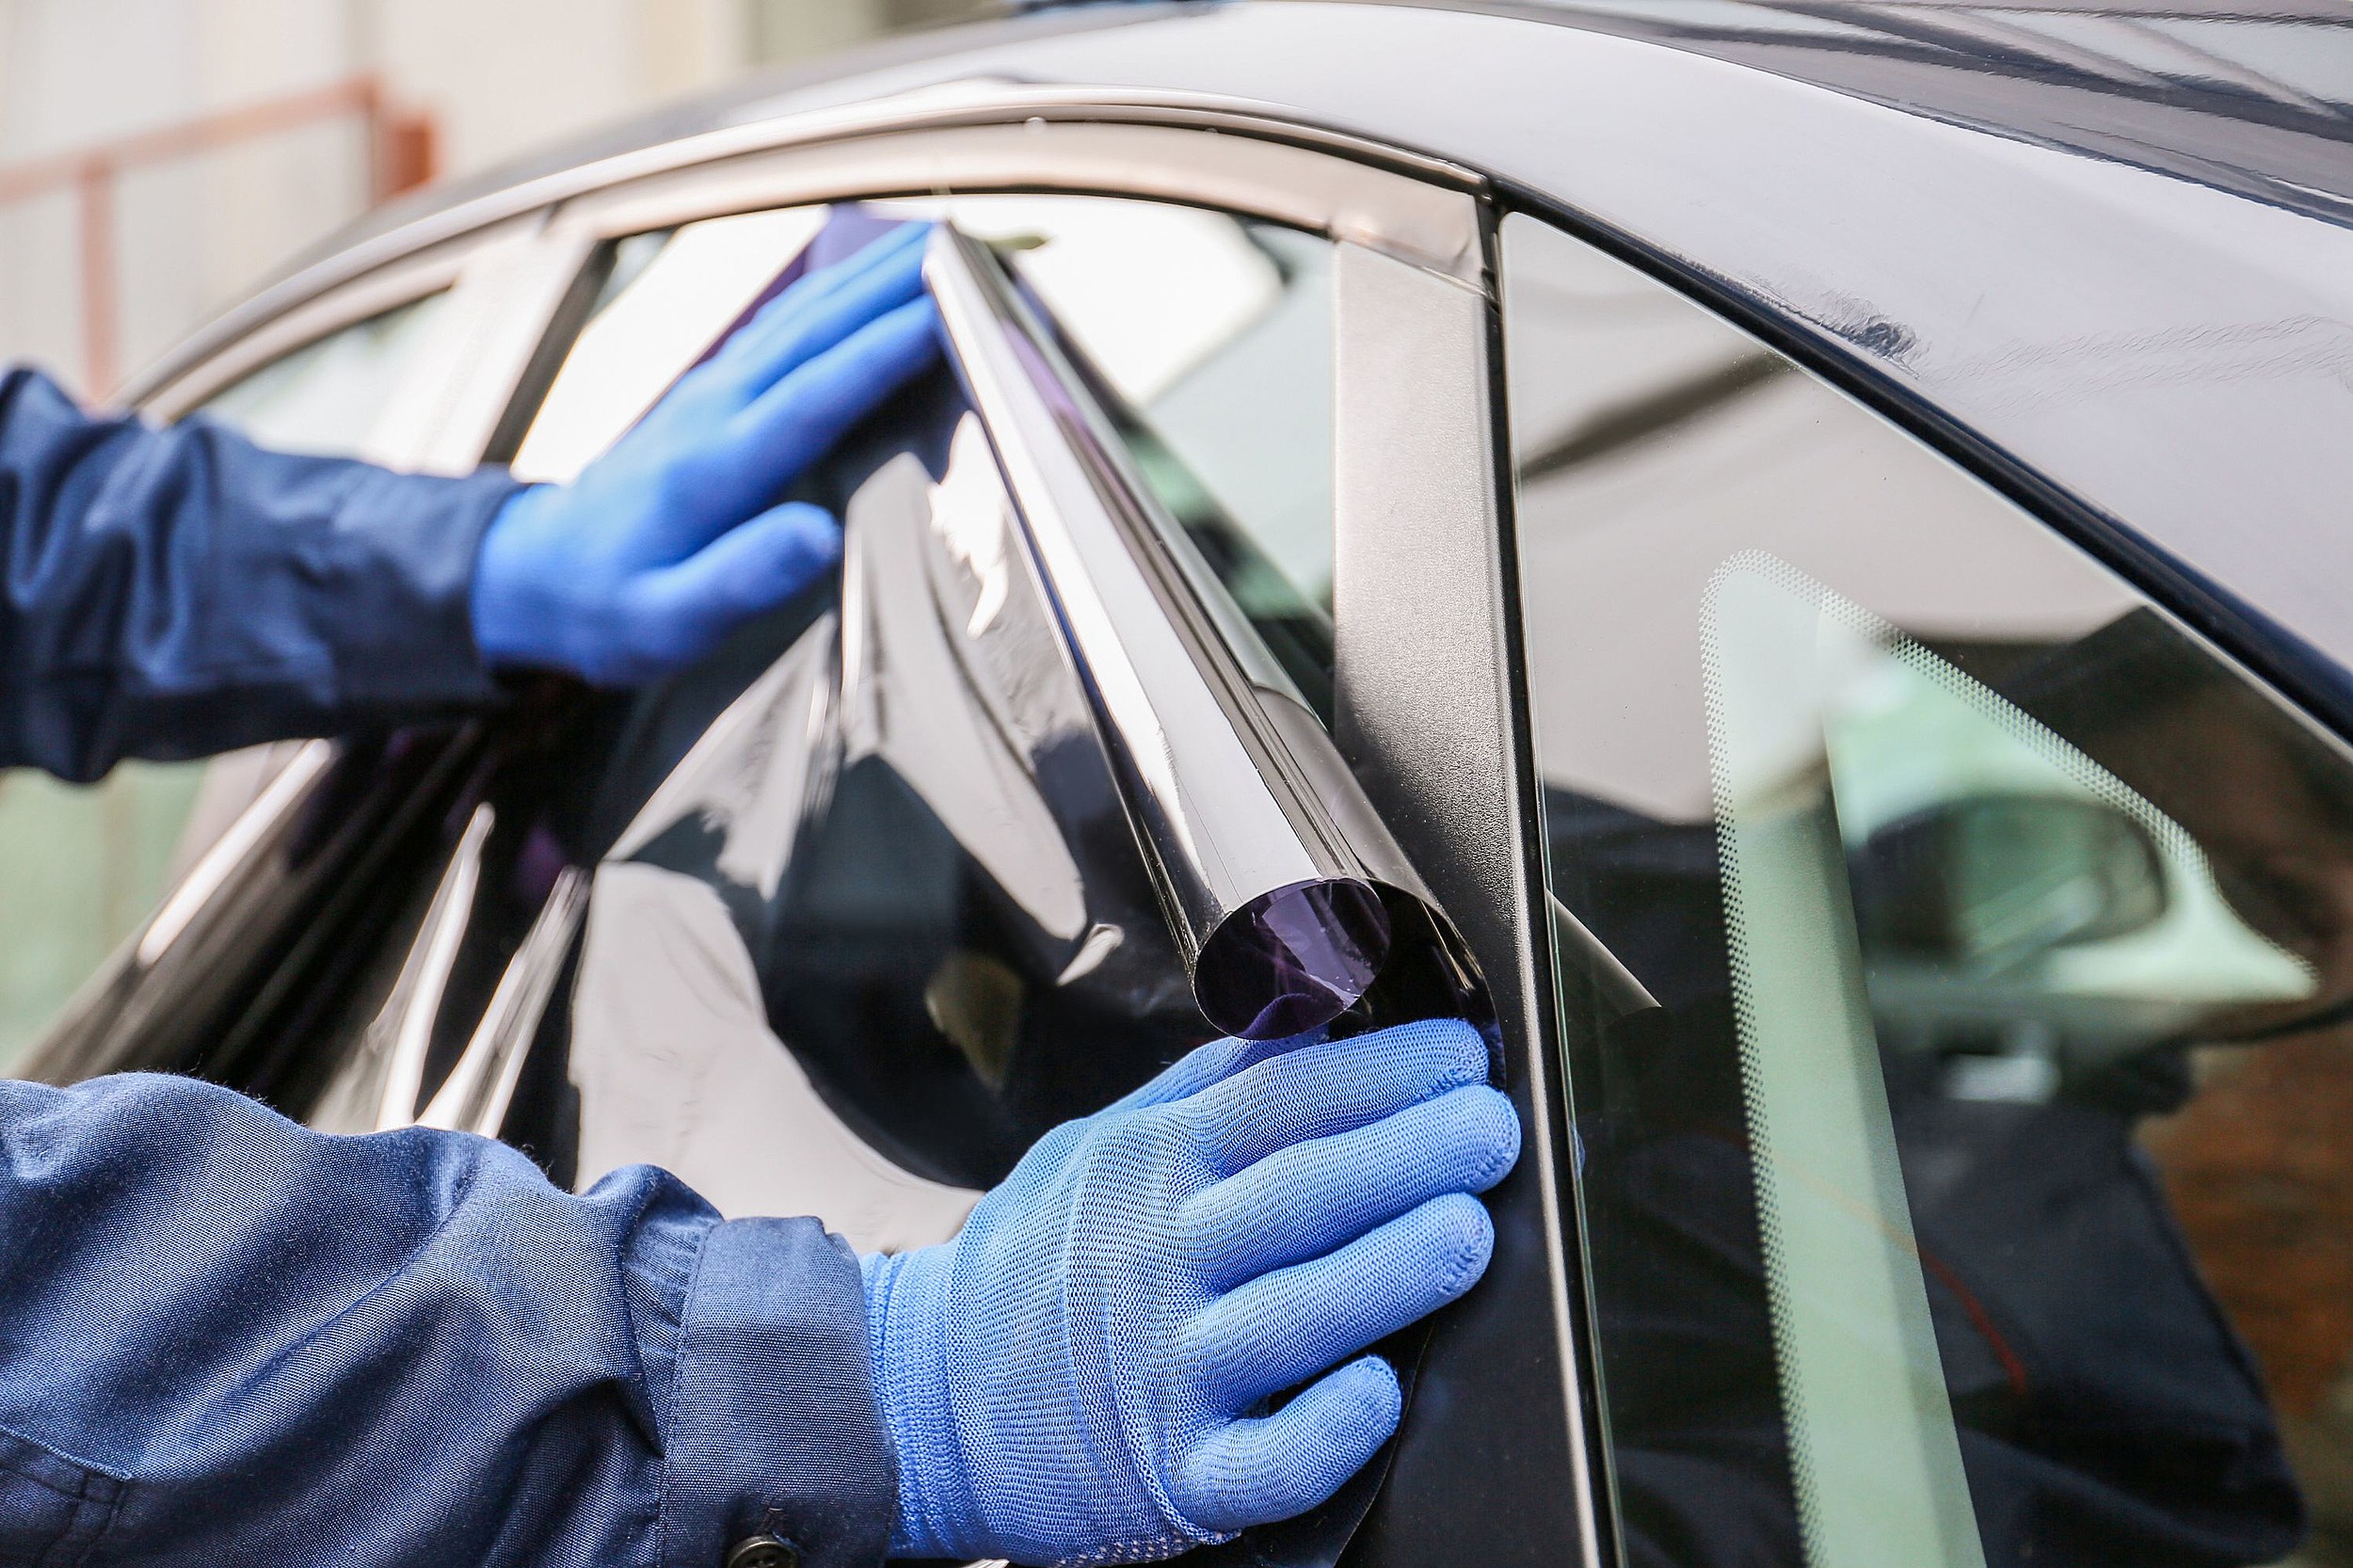 How Much Legal Car Window Tint Can You Have in Washington State?